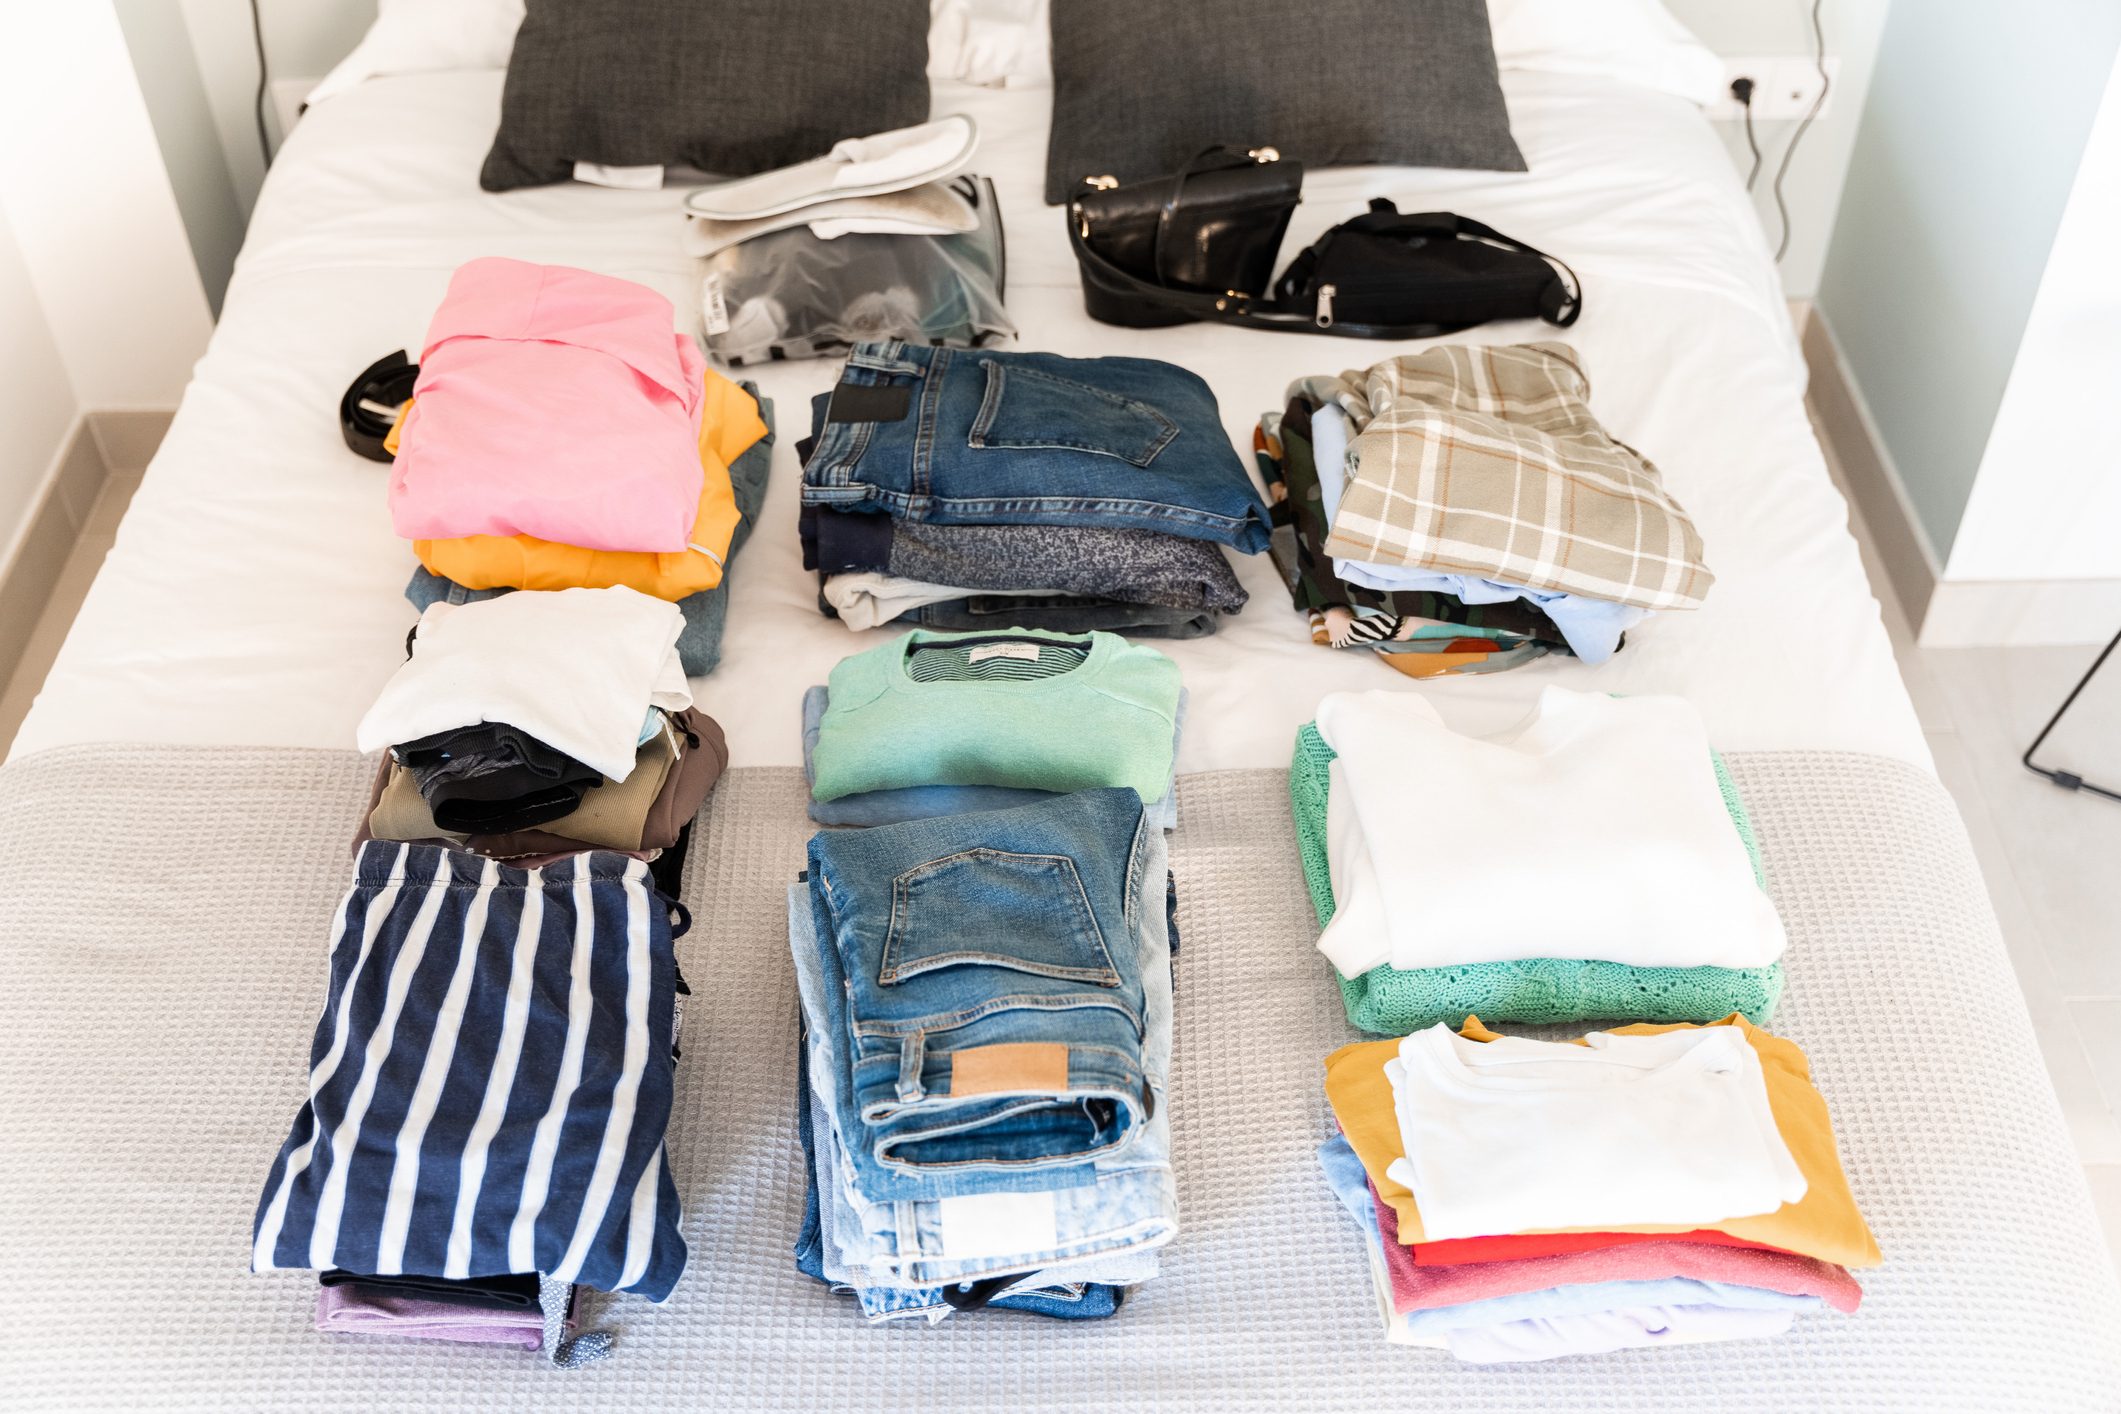 <p>It's much easier to pack if you lay everything out before you begin rather than going back and forth to your closet. Refer to your packing list and place each item in front of you. This way, you can see what you might be missing, as well as what needs to go into your suitcase in the order that most makes sense.</p> <p>Laying everything out also ensures you're not packing items that will get your <a href="https://www.rd.com/list/luggage-problems-tsa-security/" rel="noopener noreferrer">checked luggage flagged by TSA</a>. You can decide if you want to use <a href="https://www.amazon.com/Shacke-Pak-Packing-Organizers-Laundry/dp/B0BCM8CPJ5?th=1" rel="noopener noreferrer">packing cubes</a>, which many travelers swear by to organize and save space.</p> <p class="listicle-page__cta-button-shop"><a class="shop-btn" href="https://www.amazon.com/Shacke-Pak-Packing-Organizers-Laundry/dp/B0BCM8CPJ5?th=1">Shop the Packing Cubes</a></p>